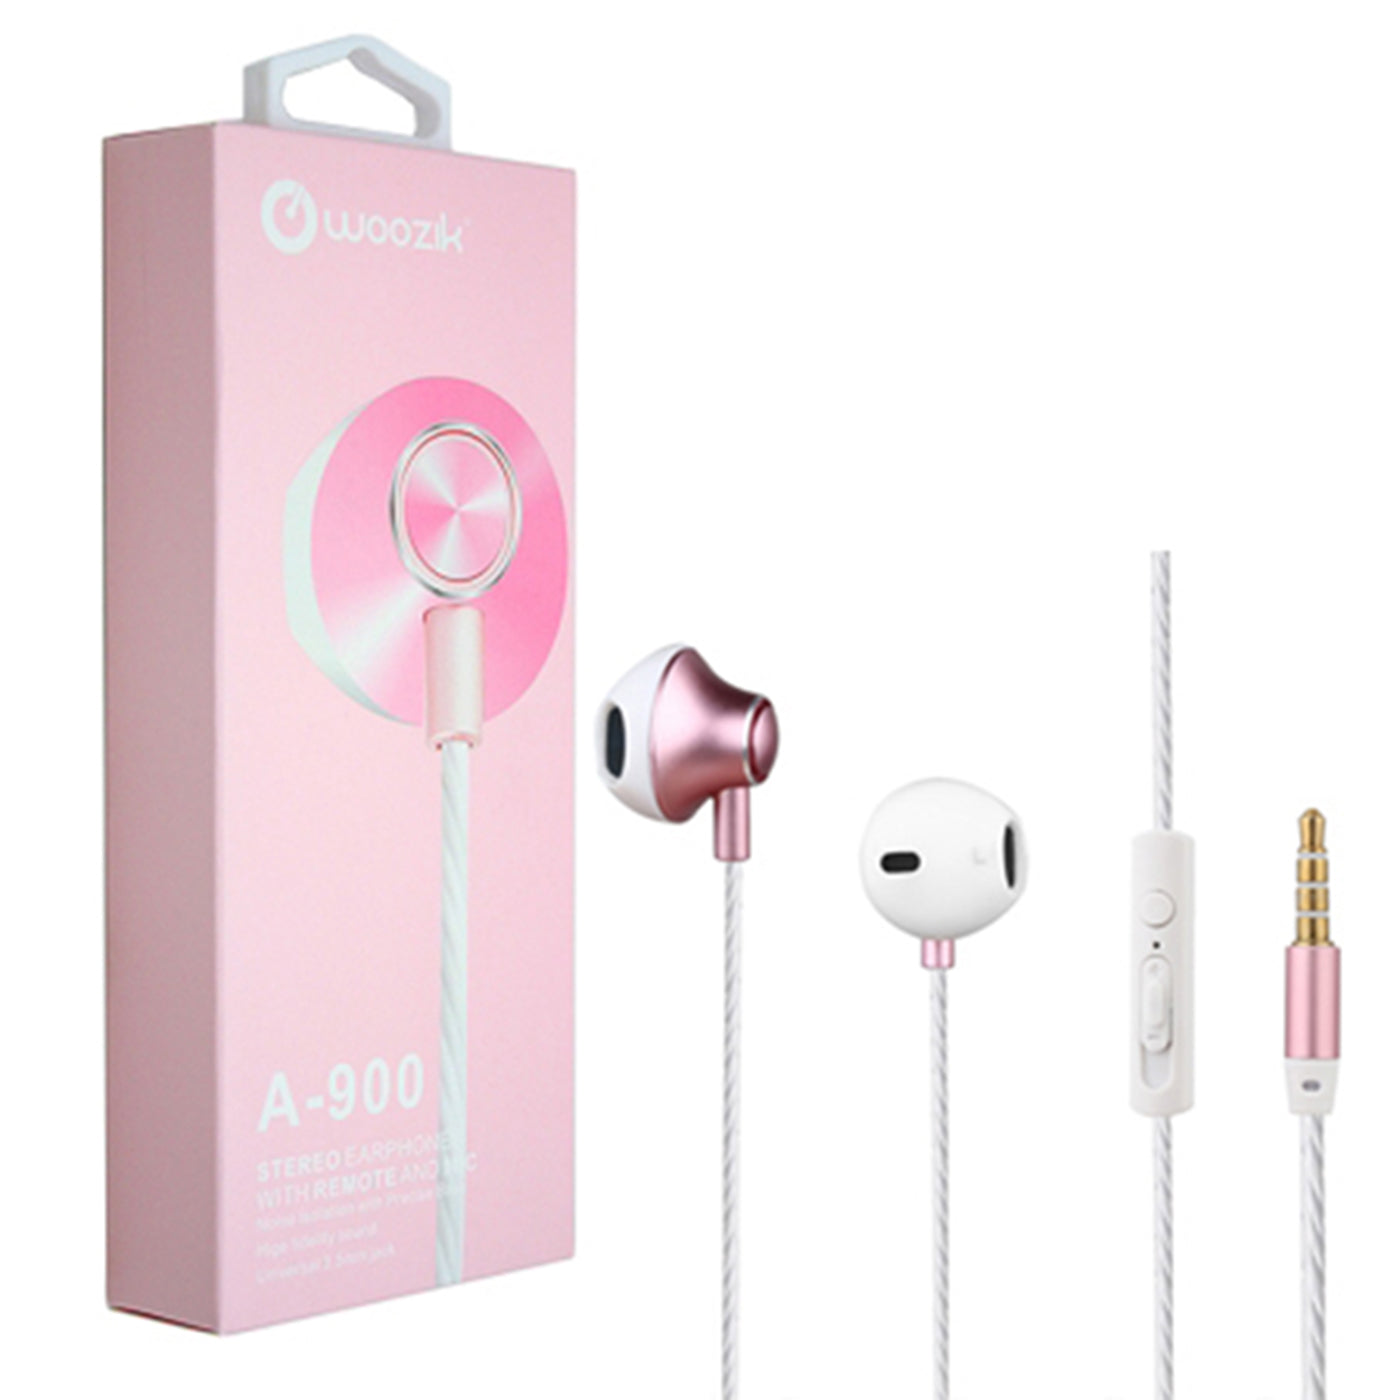 Earphones In-Ear A900 Built-In Mic, Volume Control Stereo Rose Gold Color